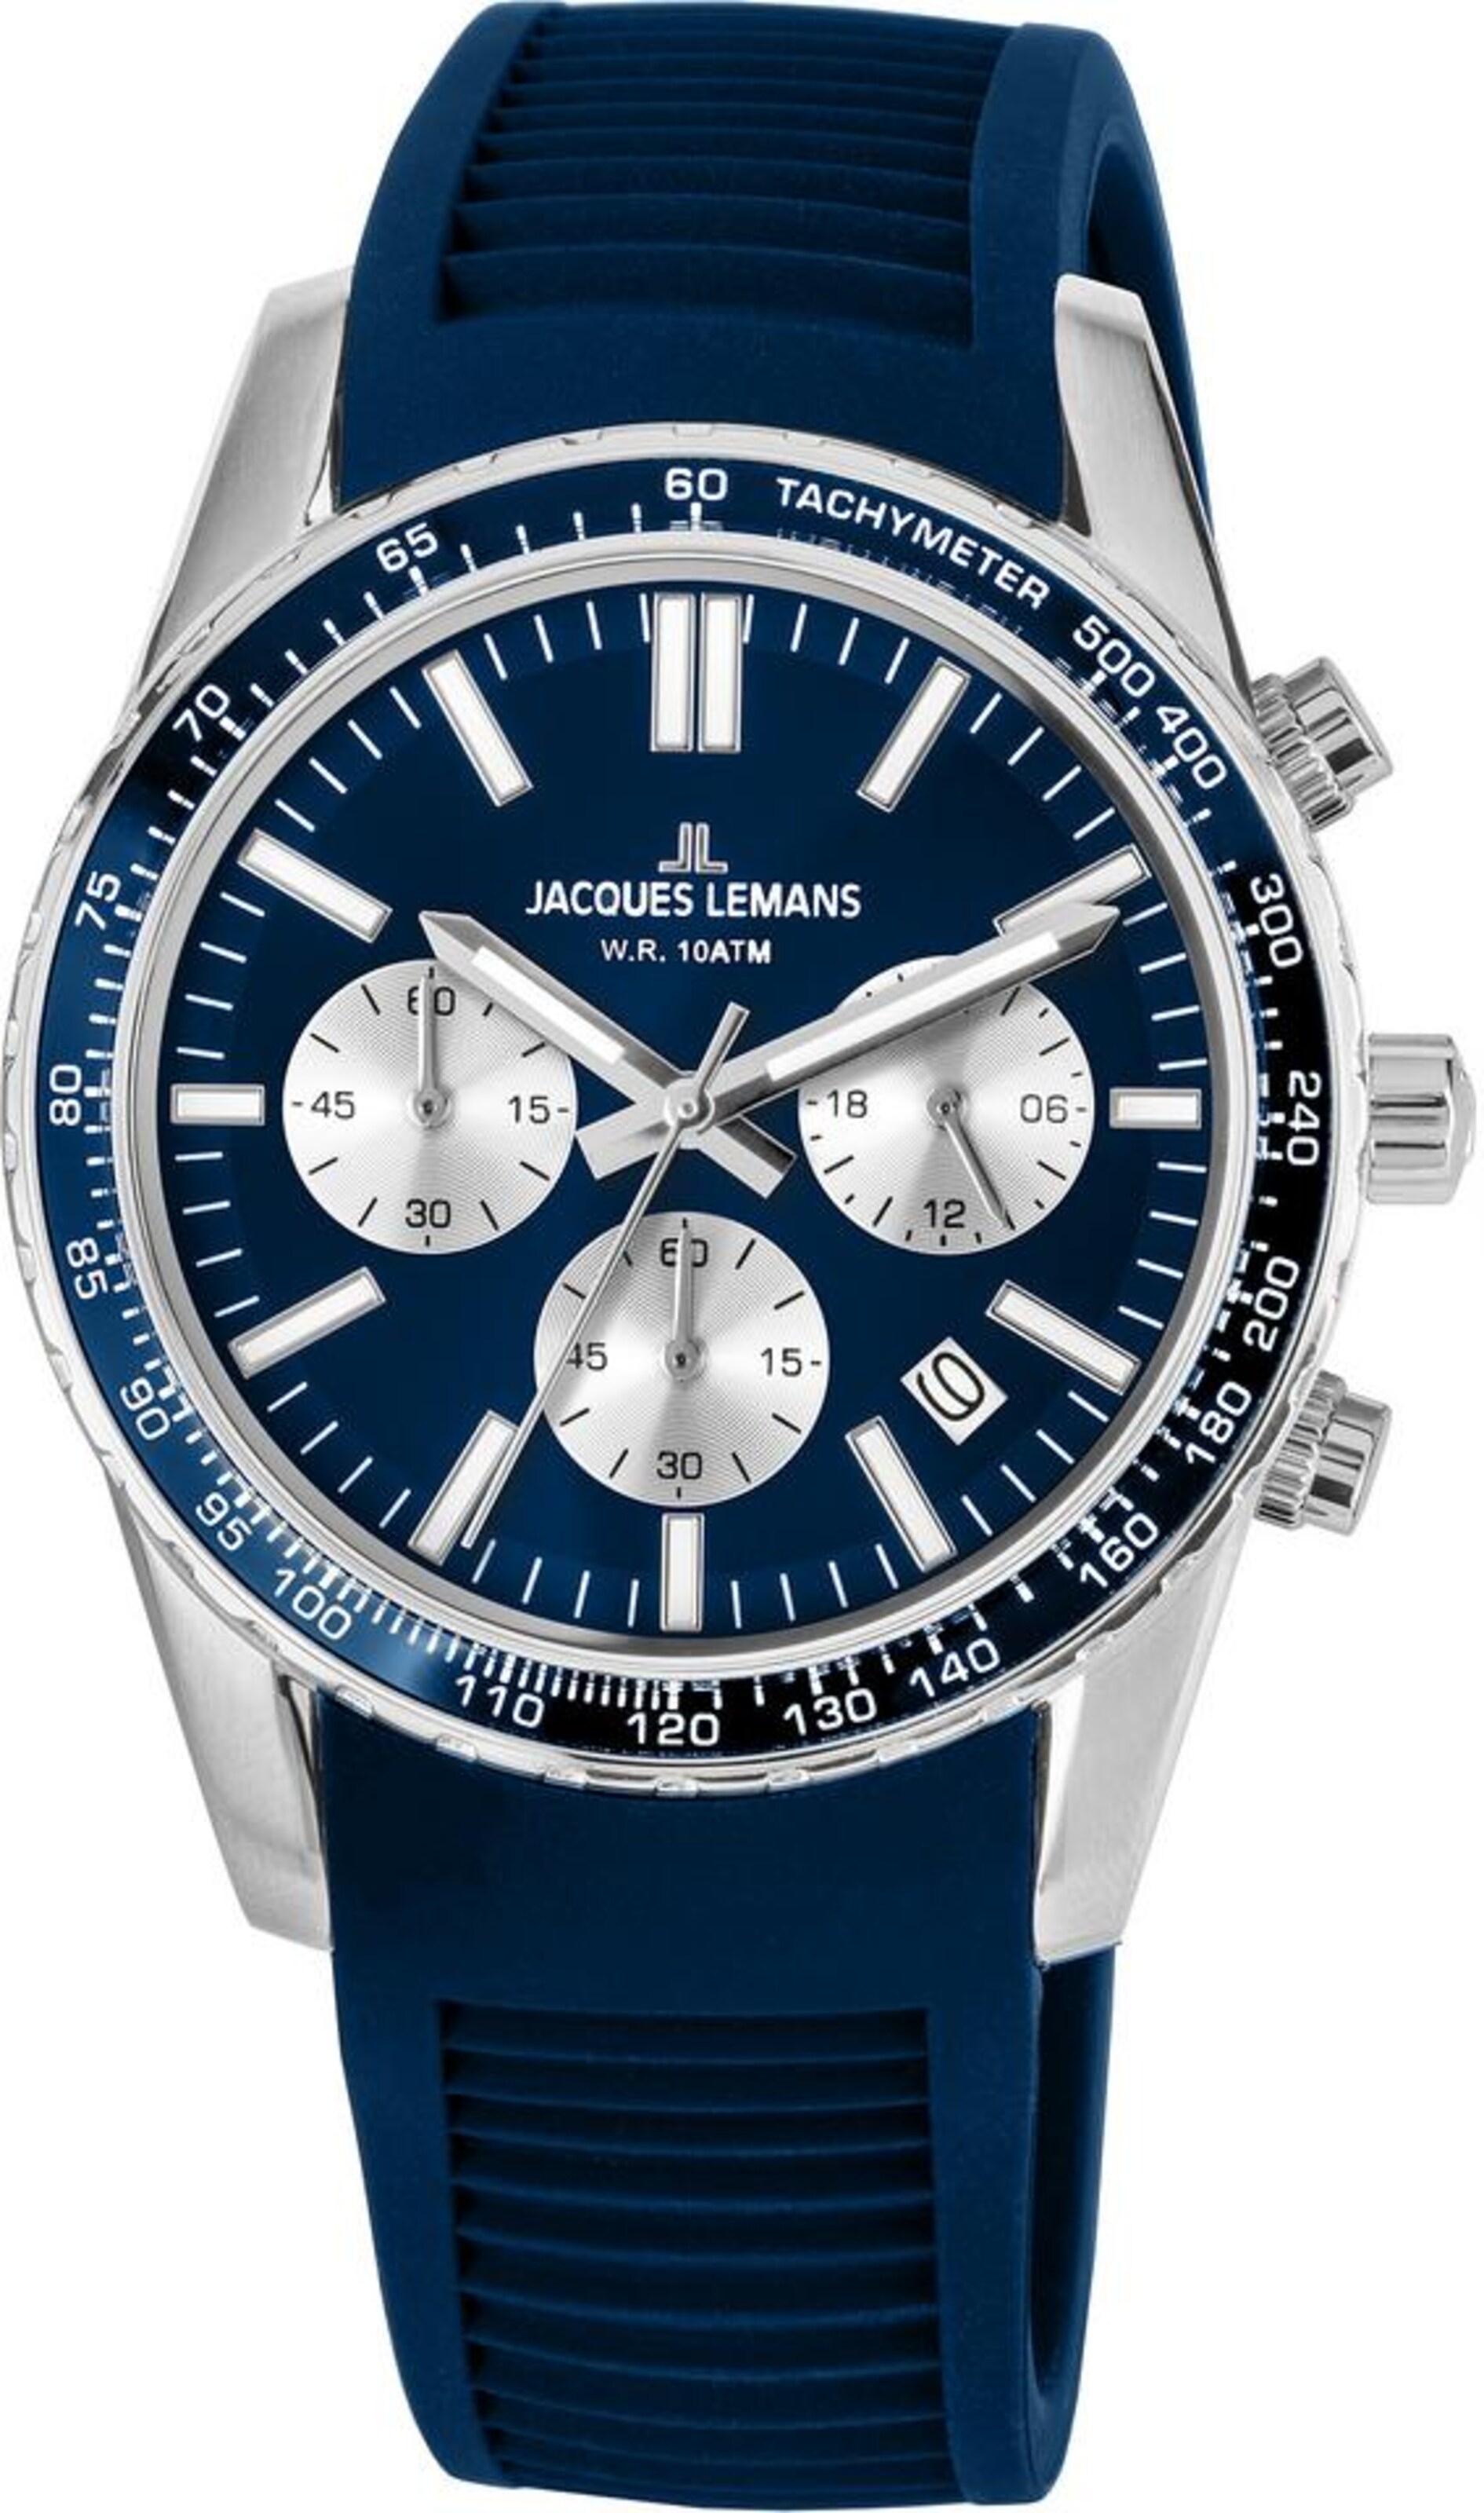 Jacques Lemans Uhr Liverpool in Navy 